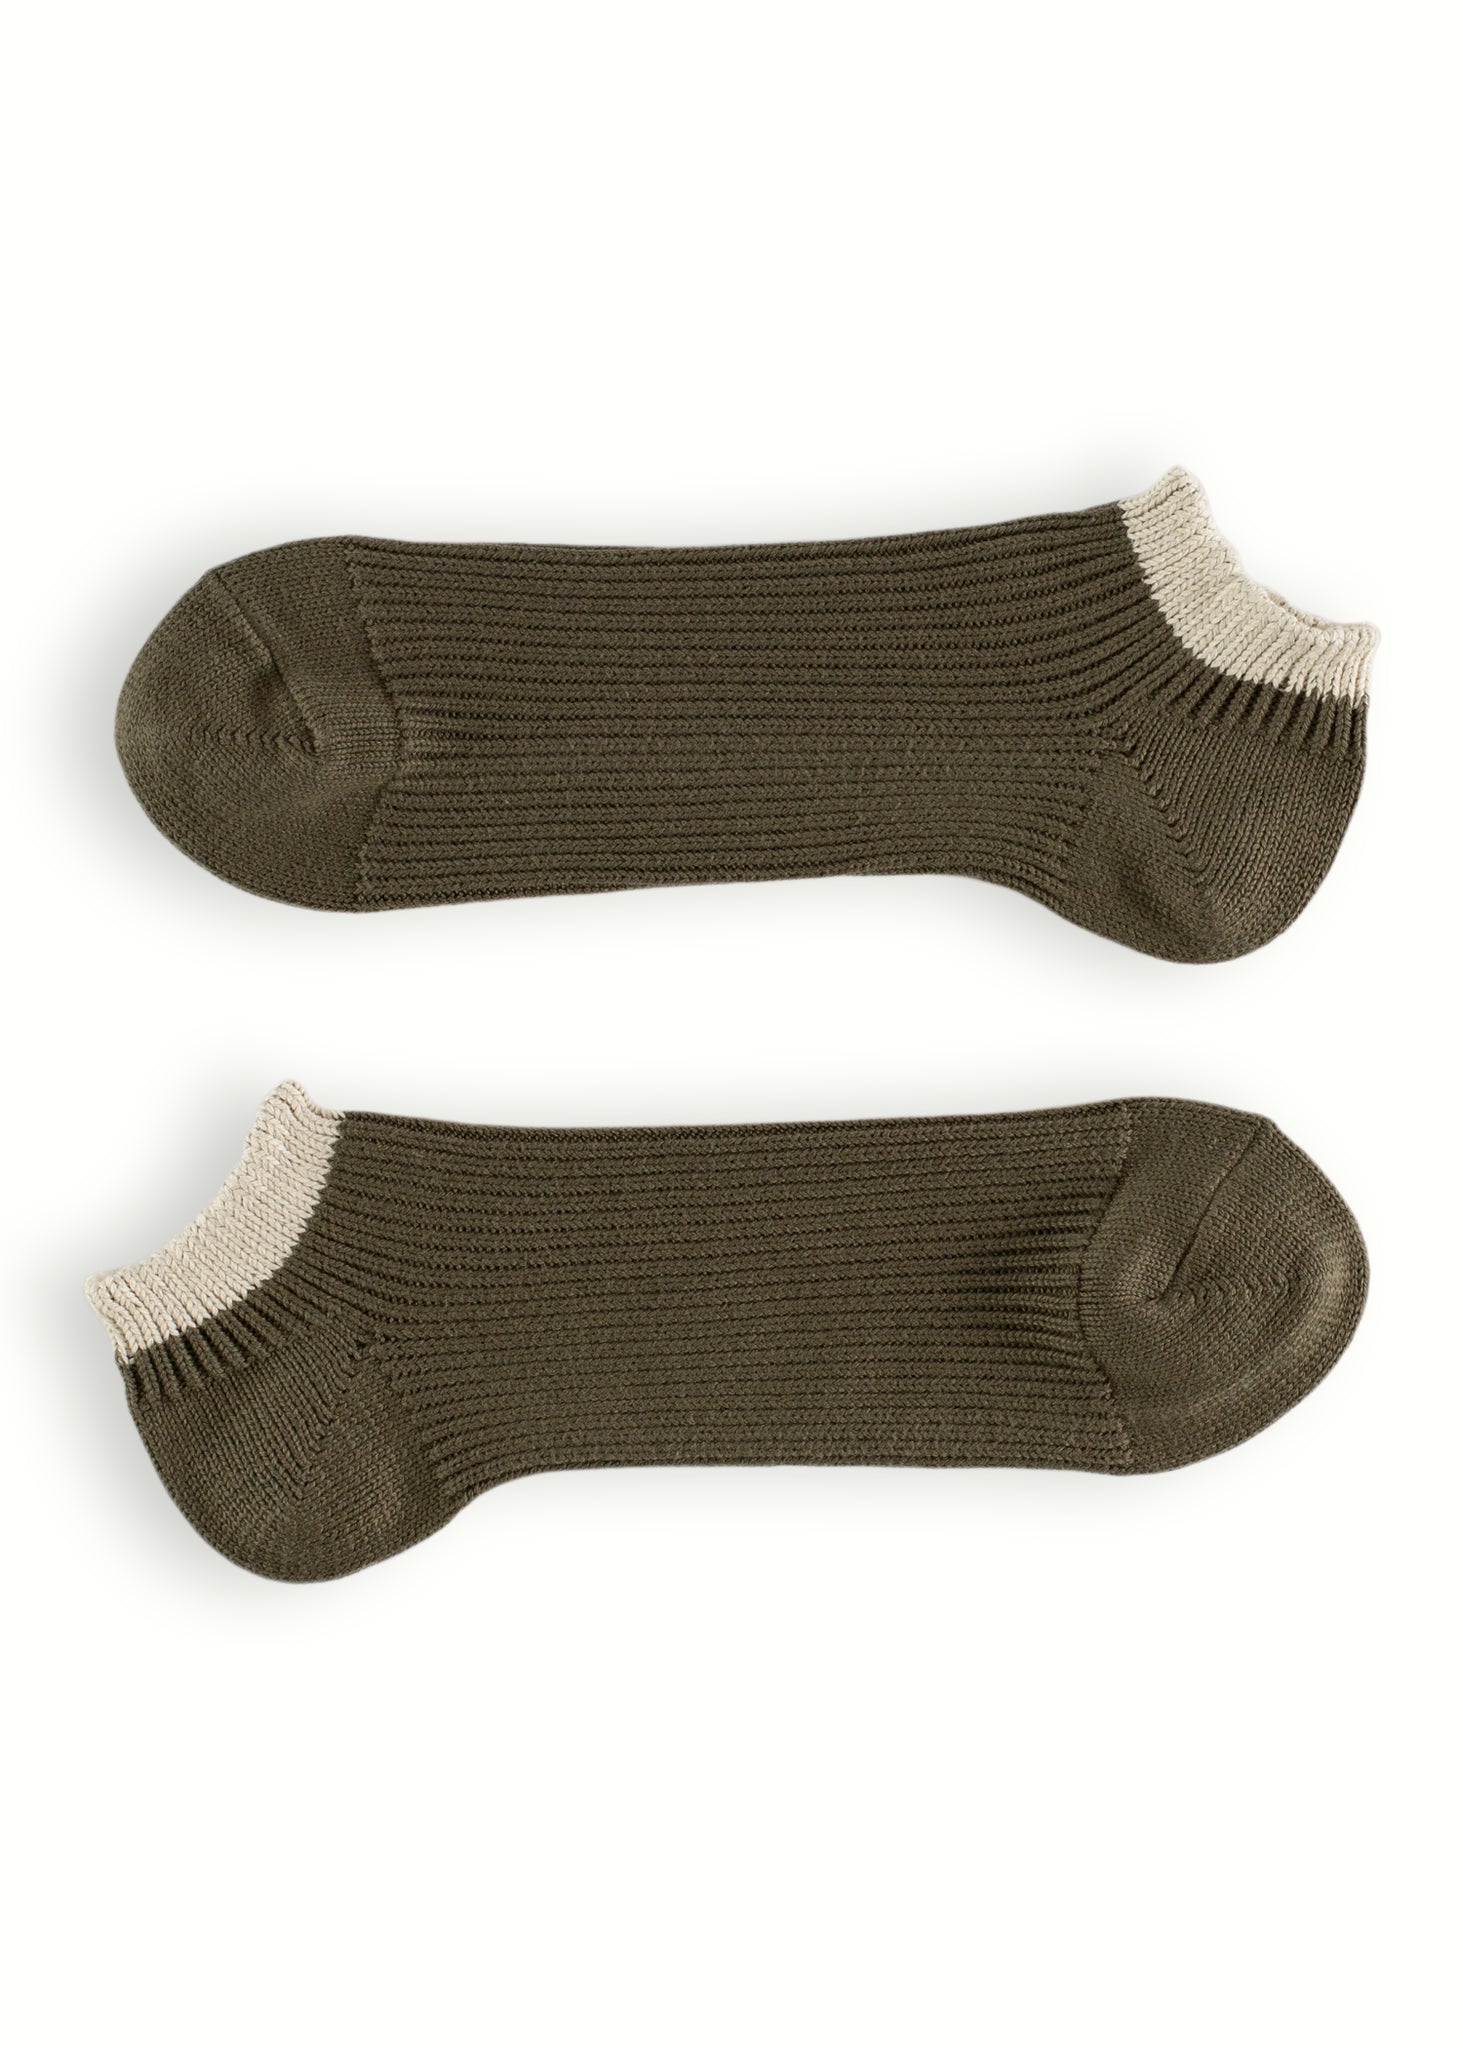 Thunders Love Link Ankle Army Green Socks